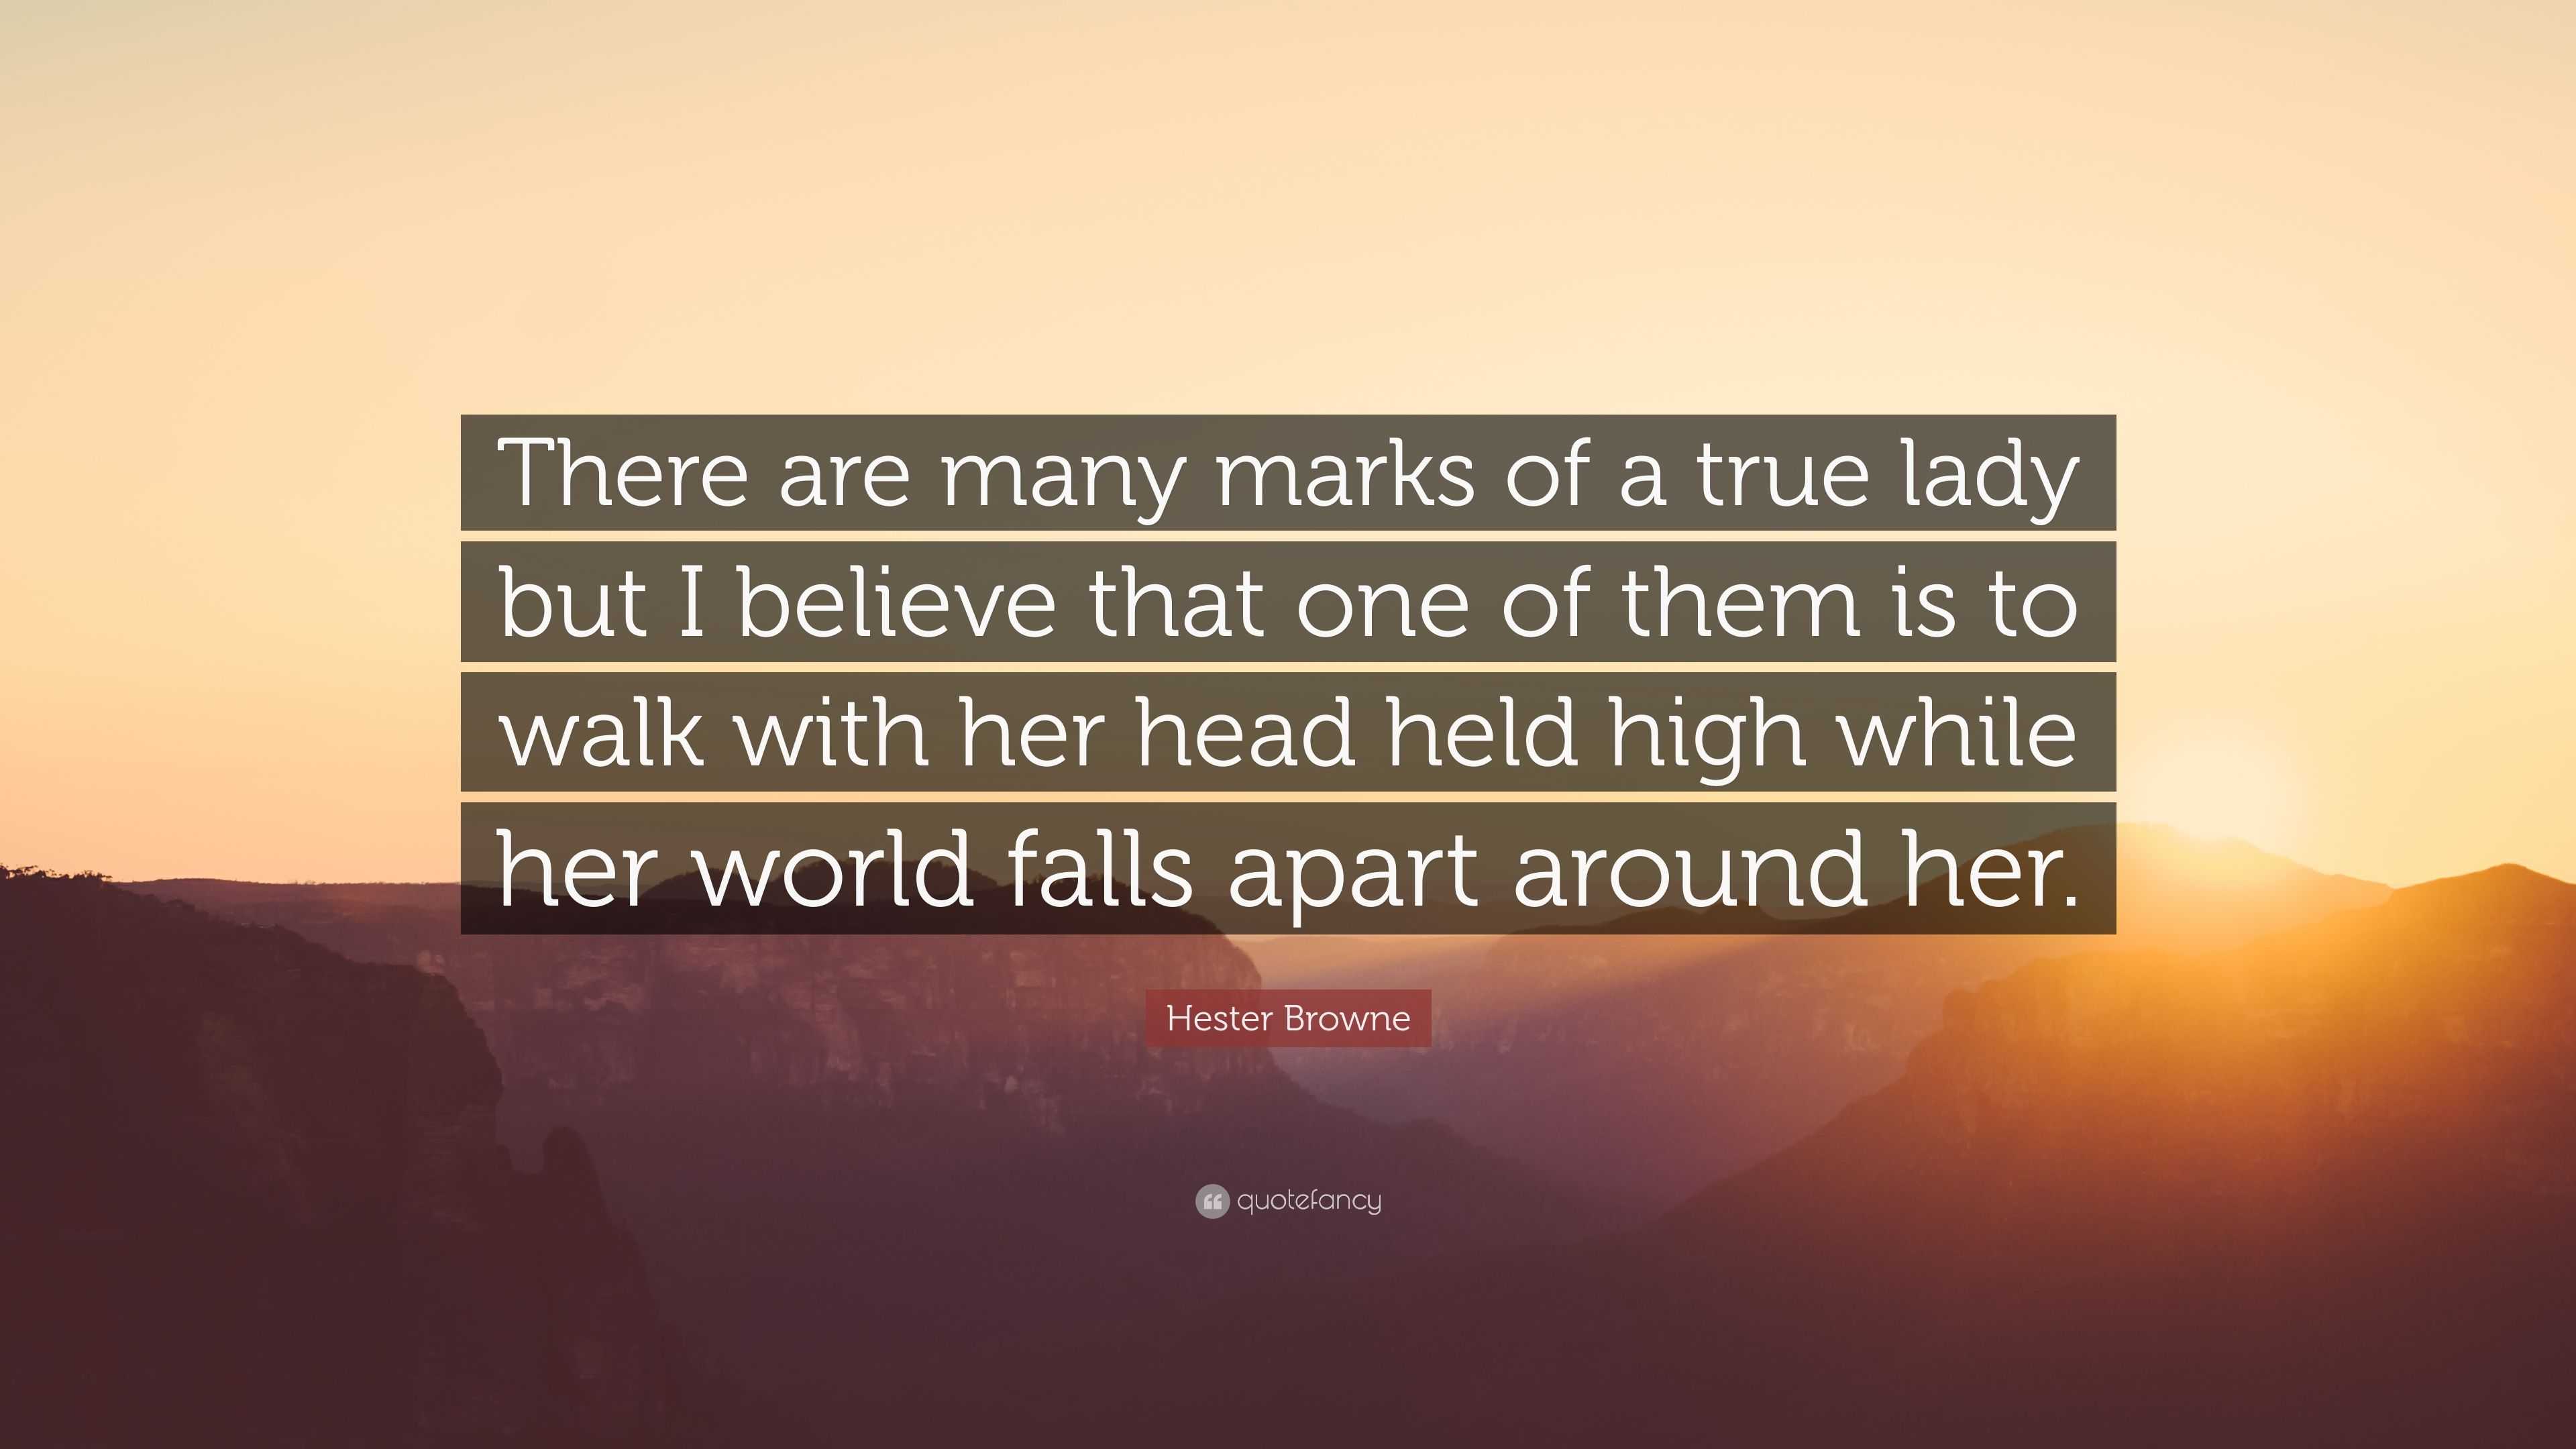 Hester Browne Quote: “There are many marks of a true lady but I believe ...